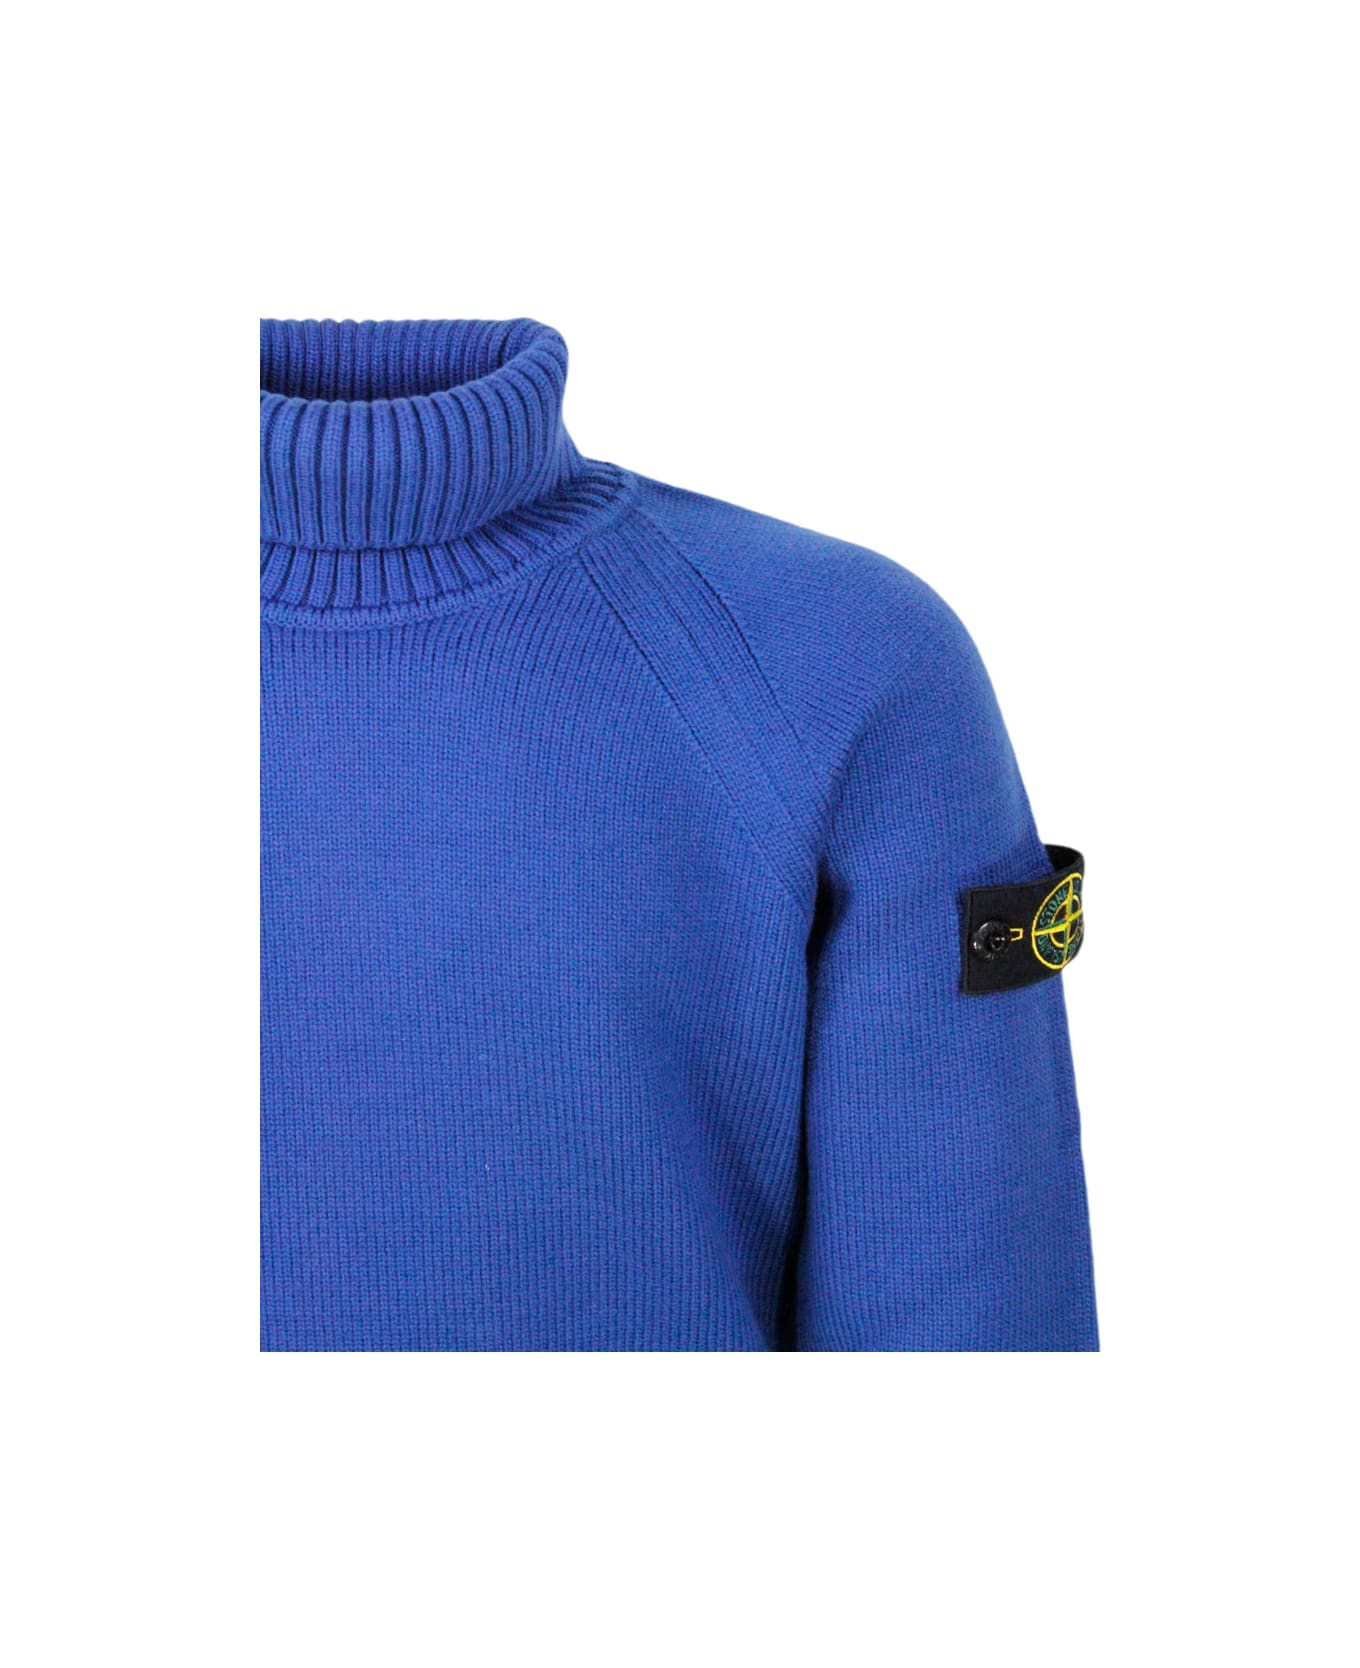 Stone Island Junior Long-sleeved Turtleneck Sweater In Warm Stretch Cotton With Badge On The Left Sleeve - Blu royal ニットウェア＆スウェットシャツ